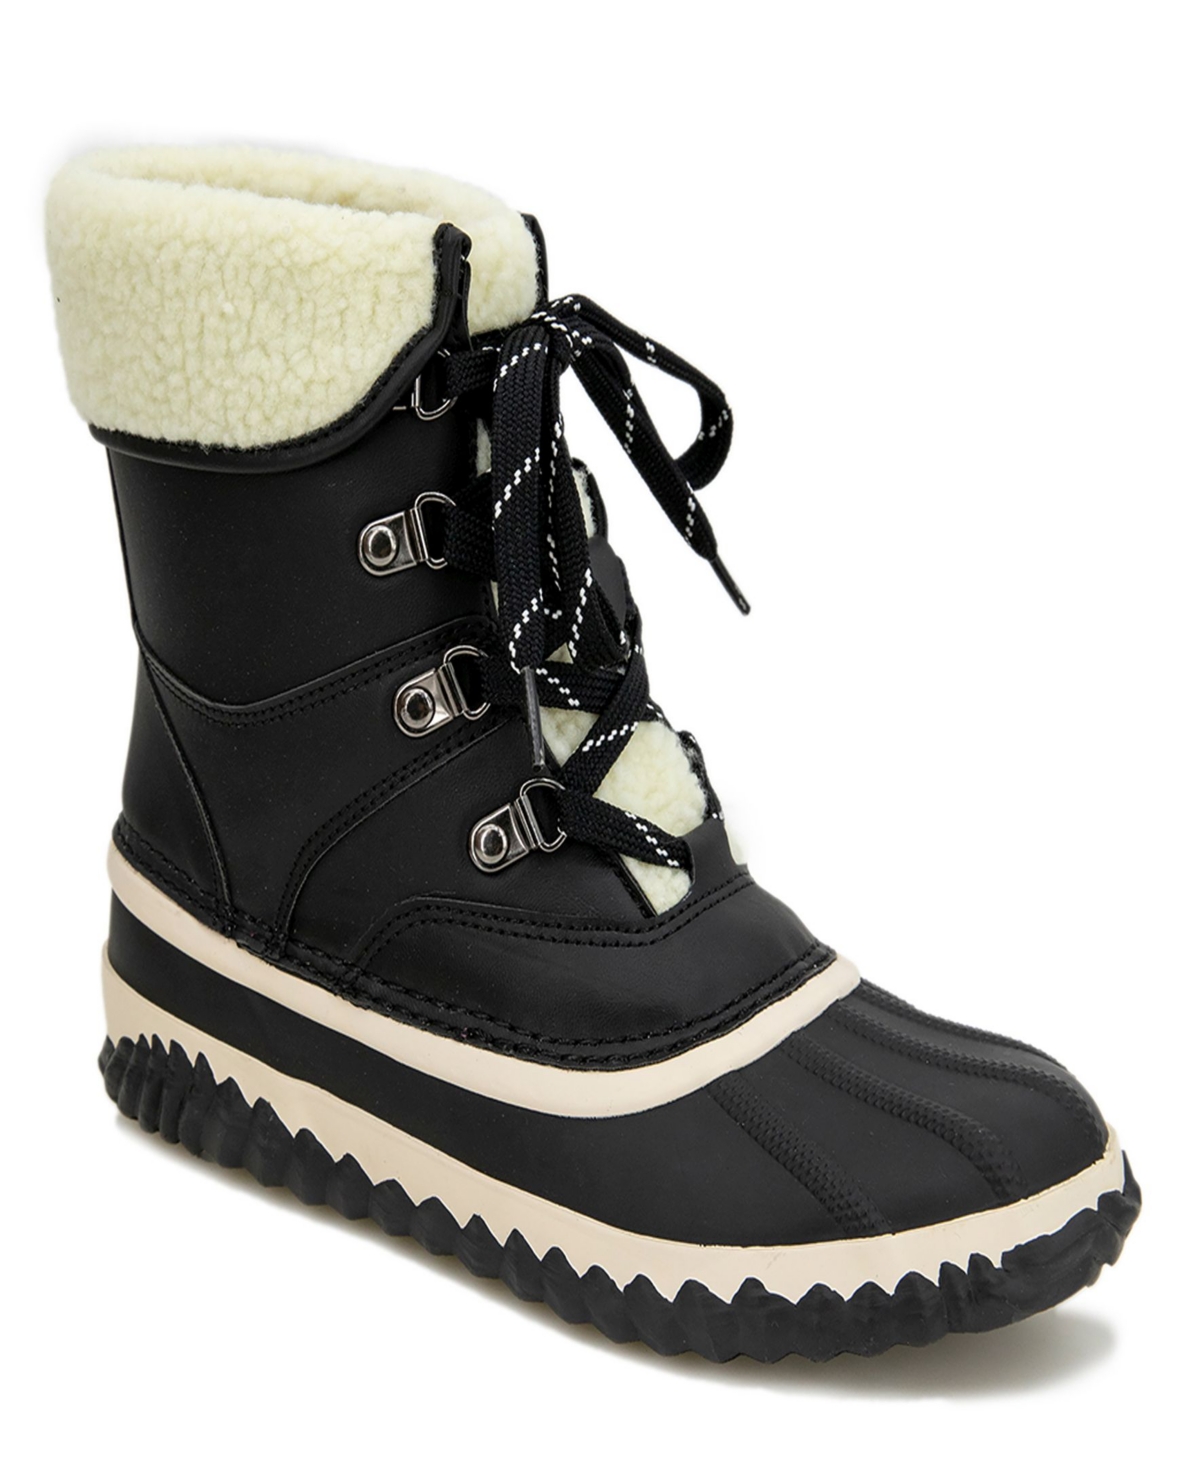 Jbu Lizzy Water Resistant Casual Duck Boot Women's Shoes